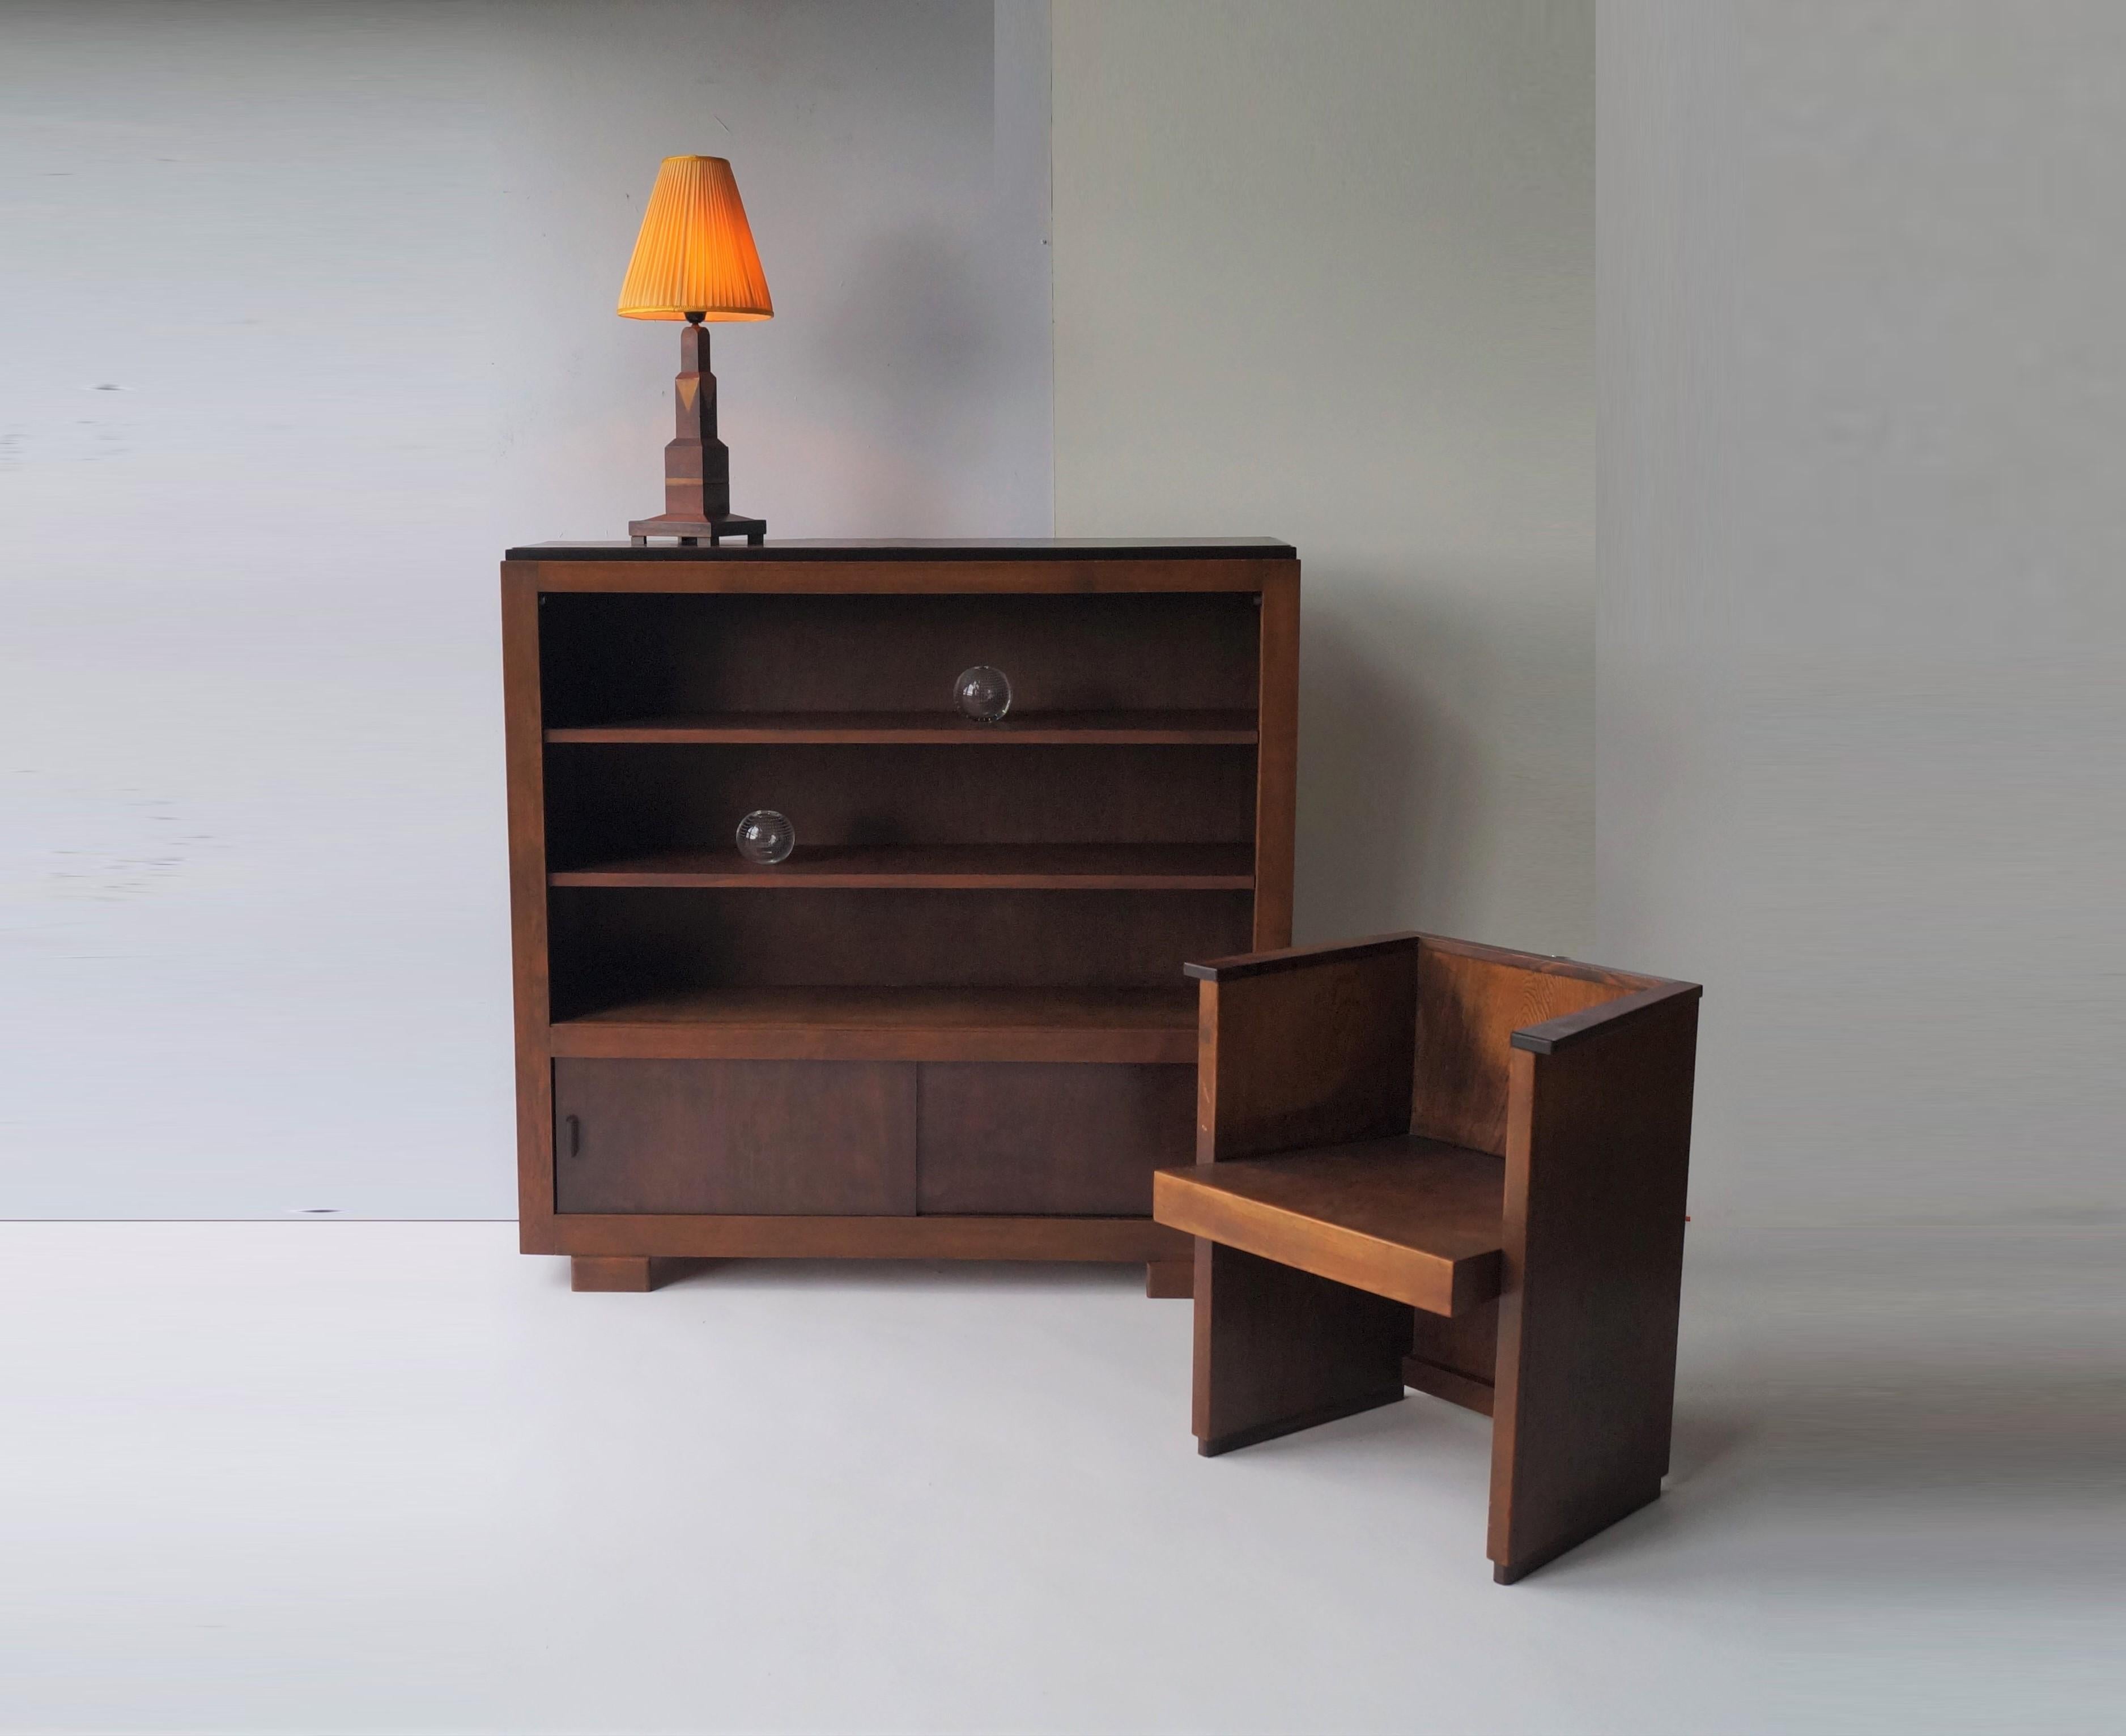 An original 1930s bookcase in a modernist, minimalist design. Based on similar designs, the cabinet is attributed to the Dutch interior designer, furniture designer and interior designer Frits Spanjaard (1889 - 1978). As illustrated in the photos,